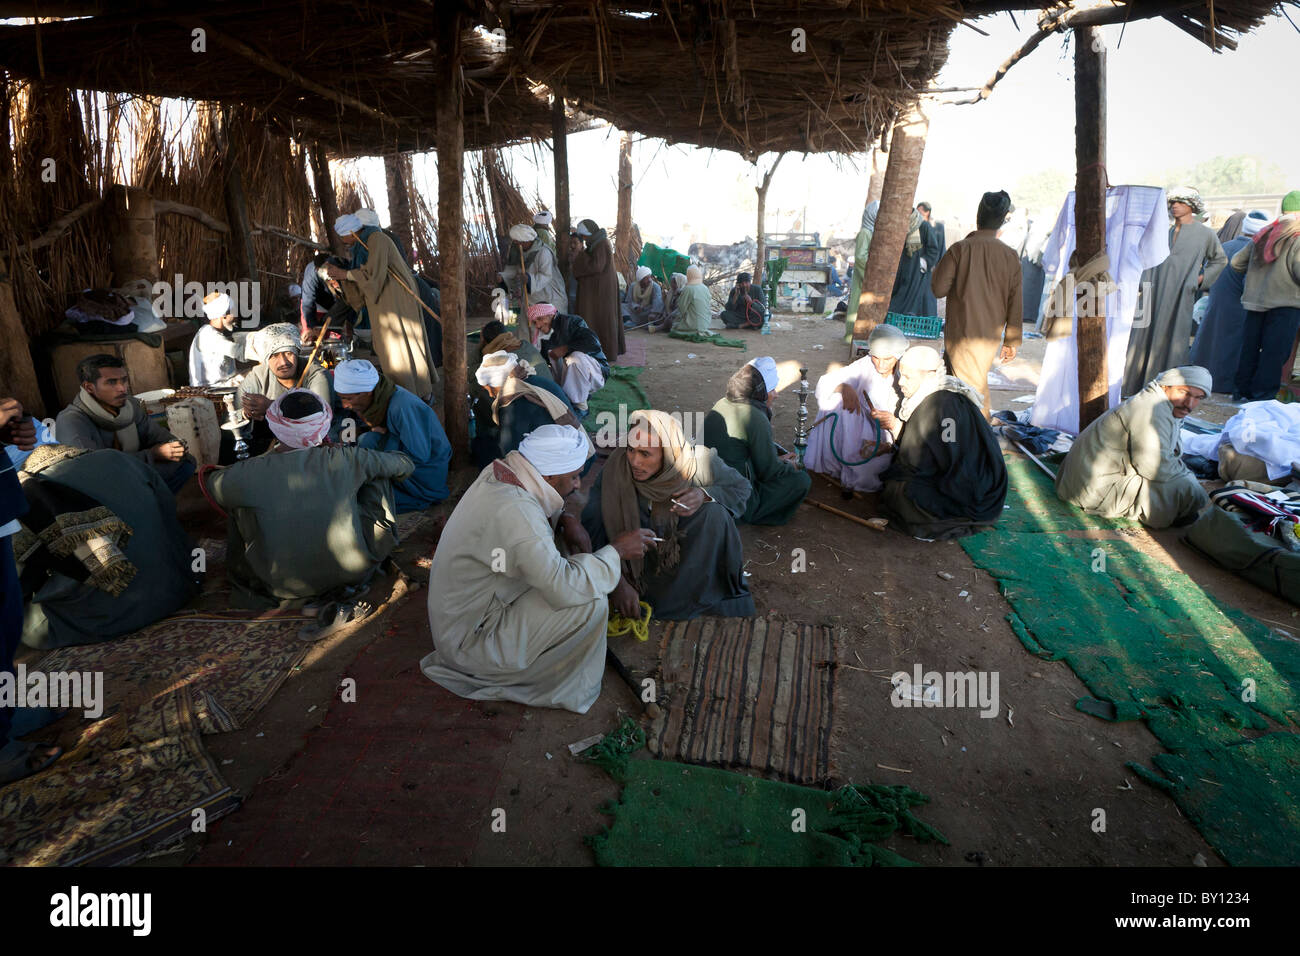 Men relaxing, talking, smoking and tea drinking in a shelter at Luxor Camel Market Egypt Africa Stock Photo